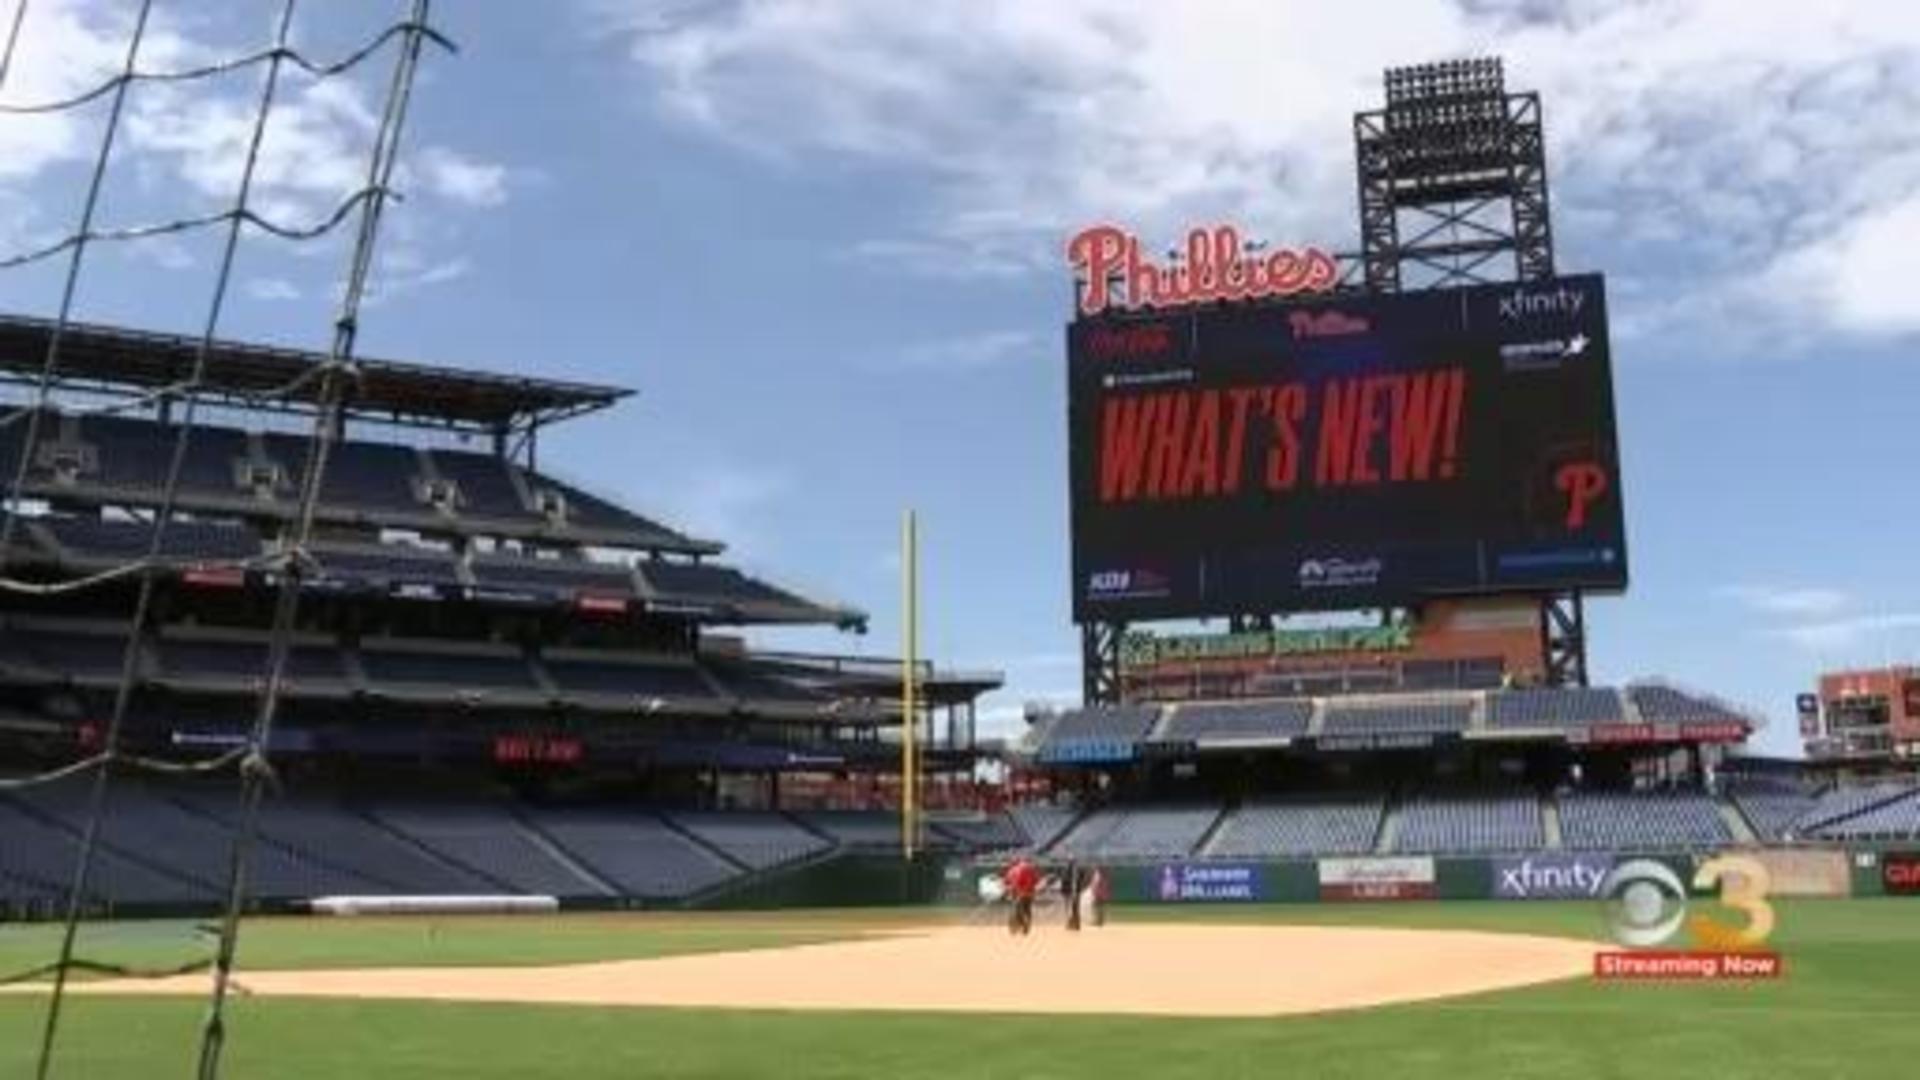 Whats new at Citizens Bank Park for the 2023 Phillies season?